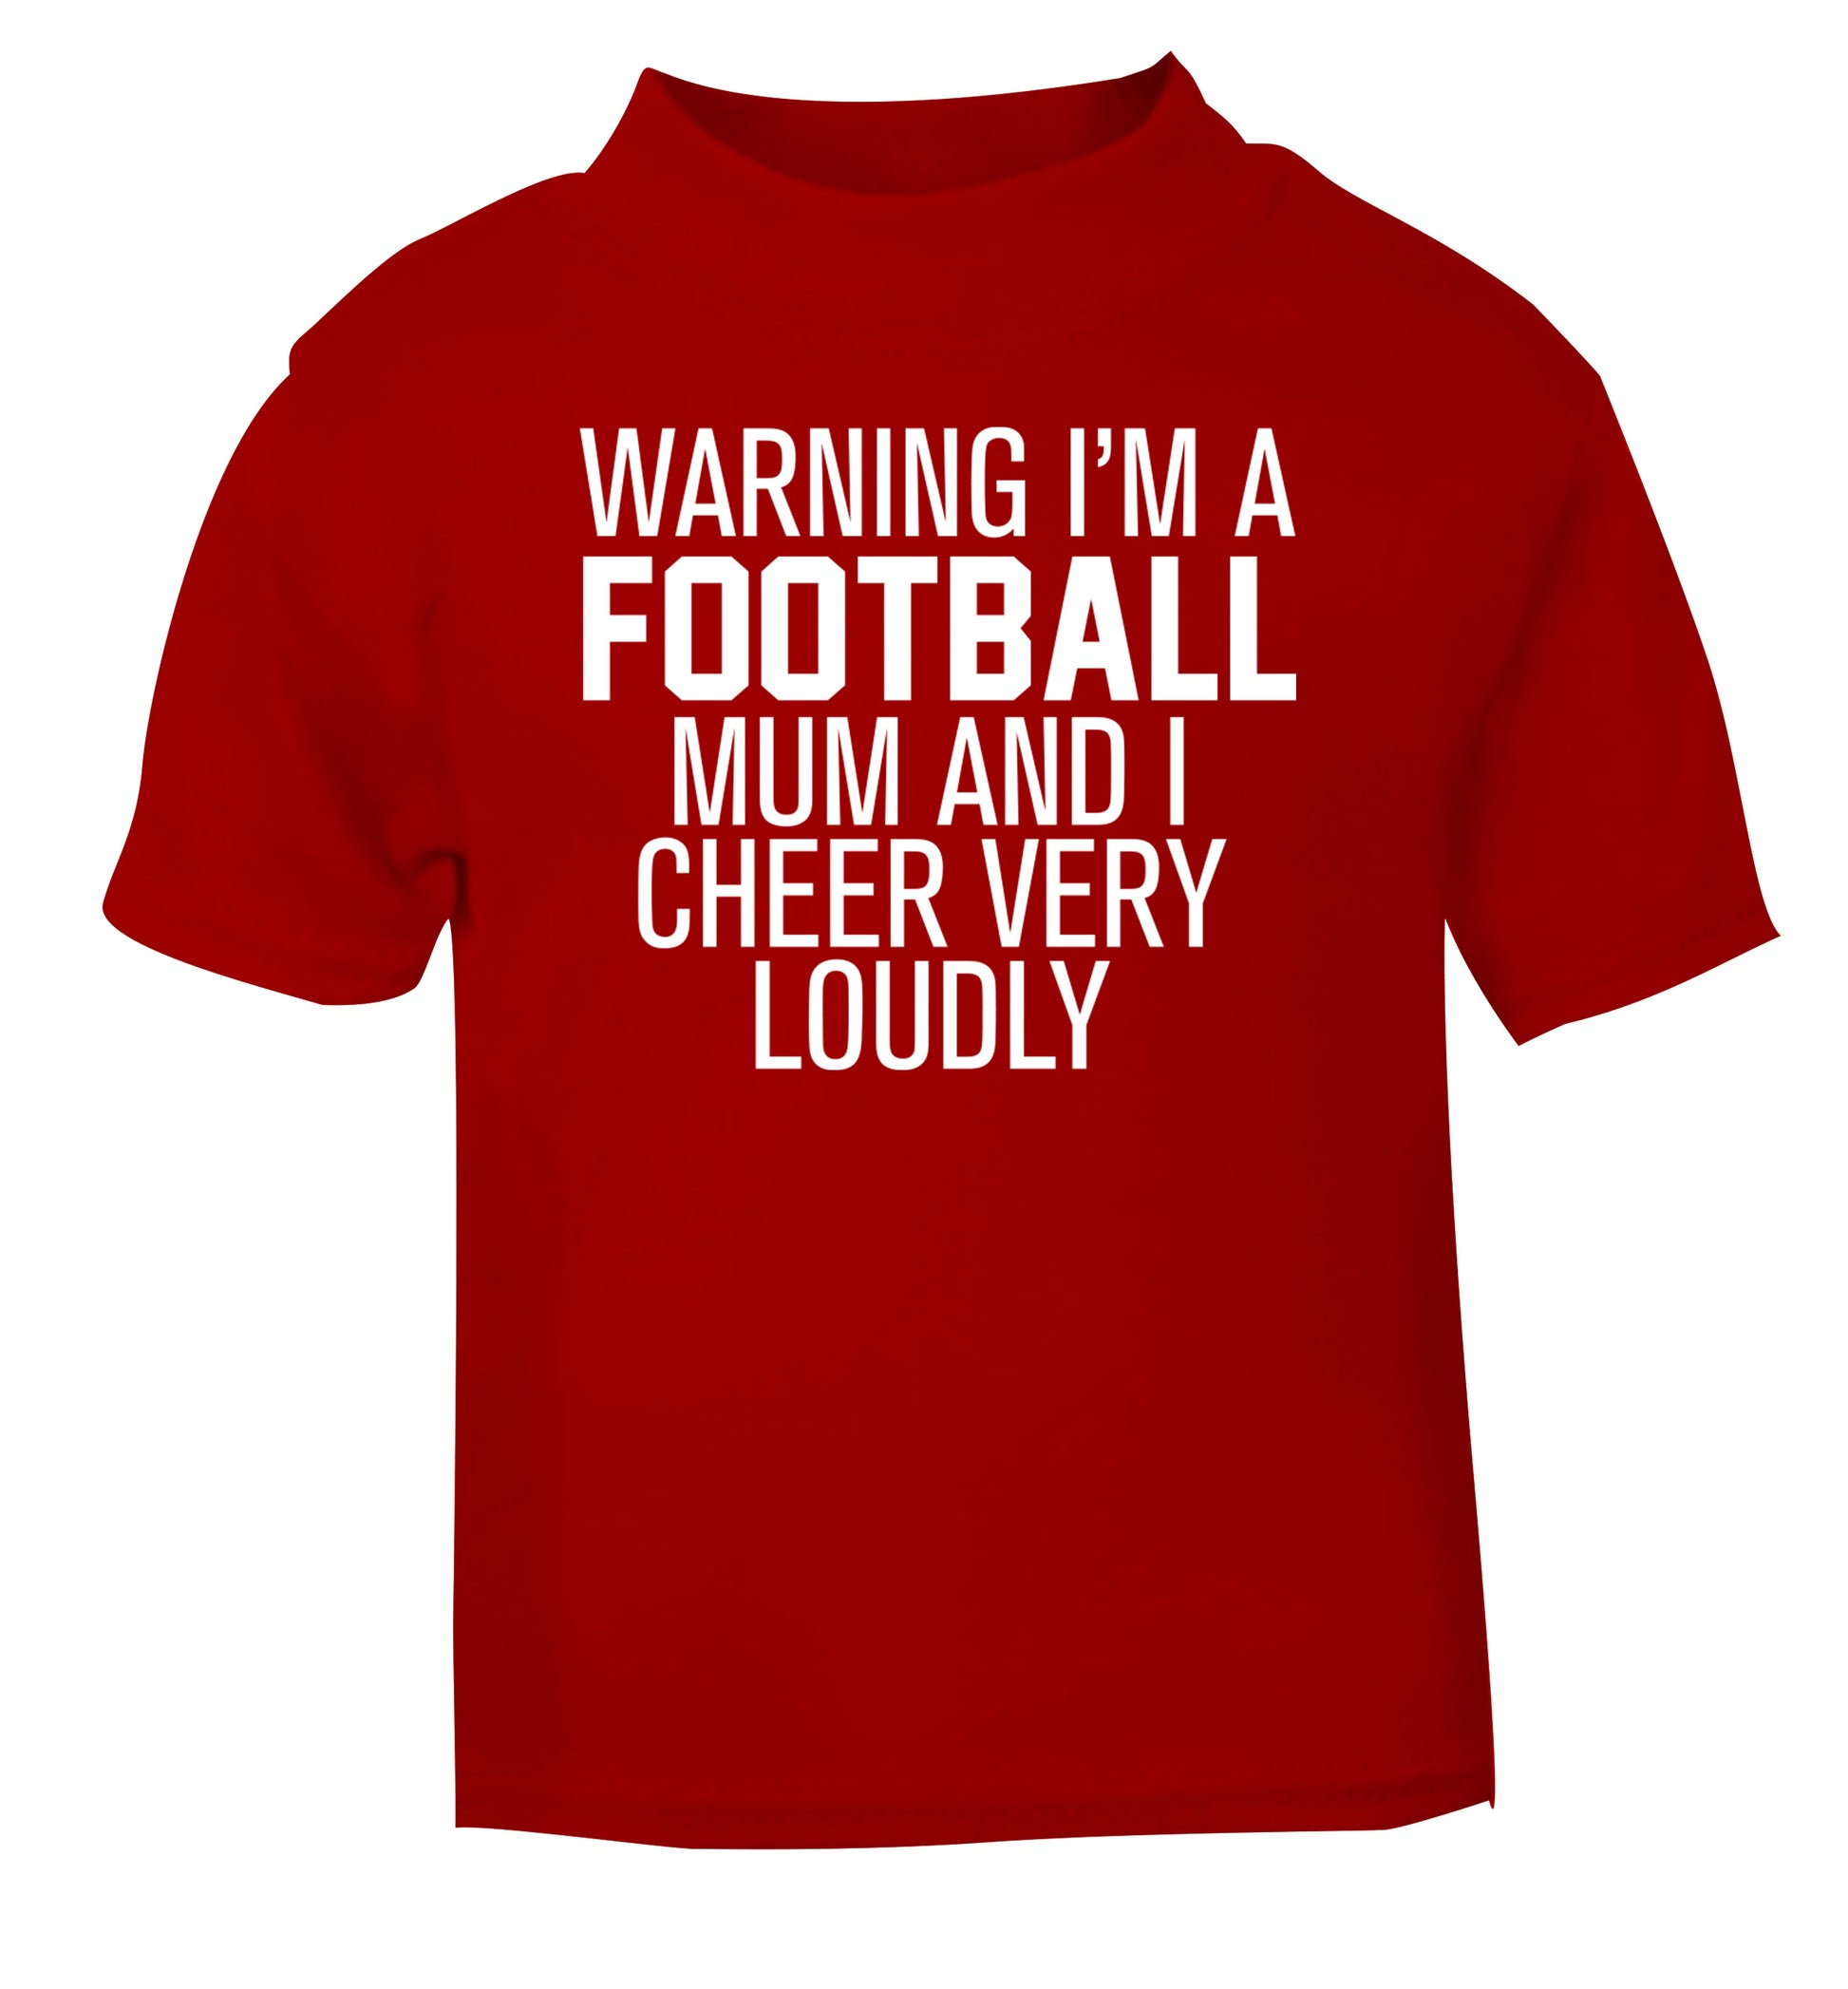 Warning I'm a football mum and I cheer very loudly red Baby Toddler Tshirt 2 Years